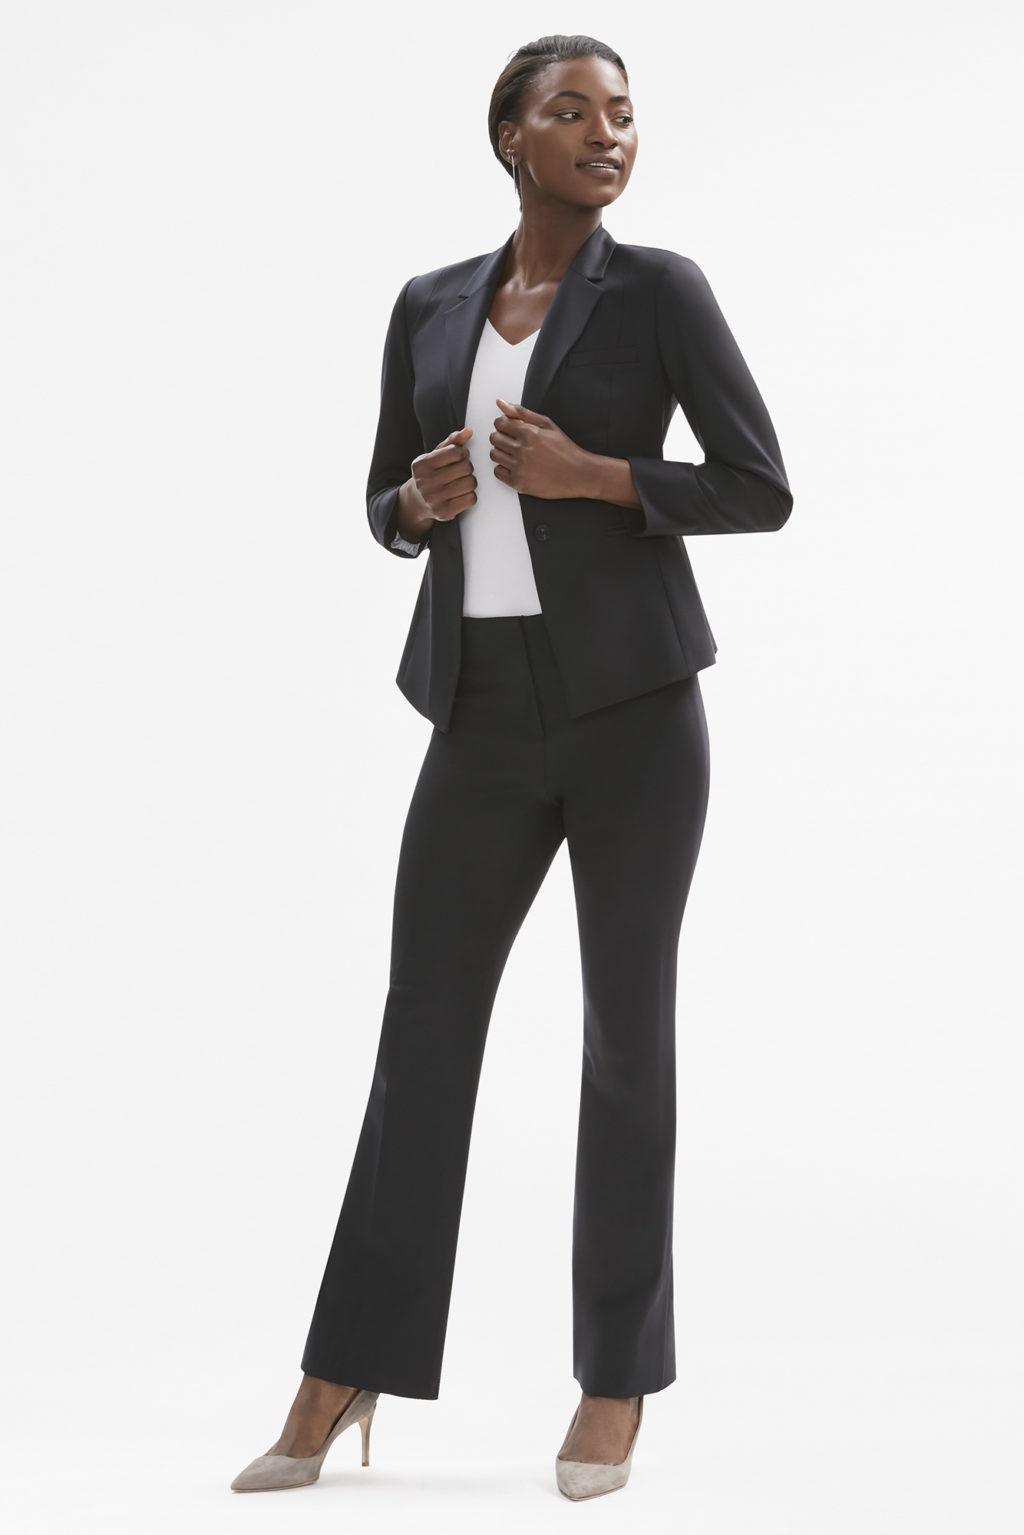 black women lawyers outfits